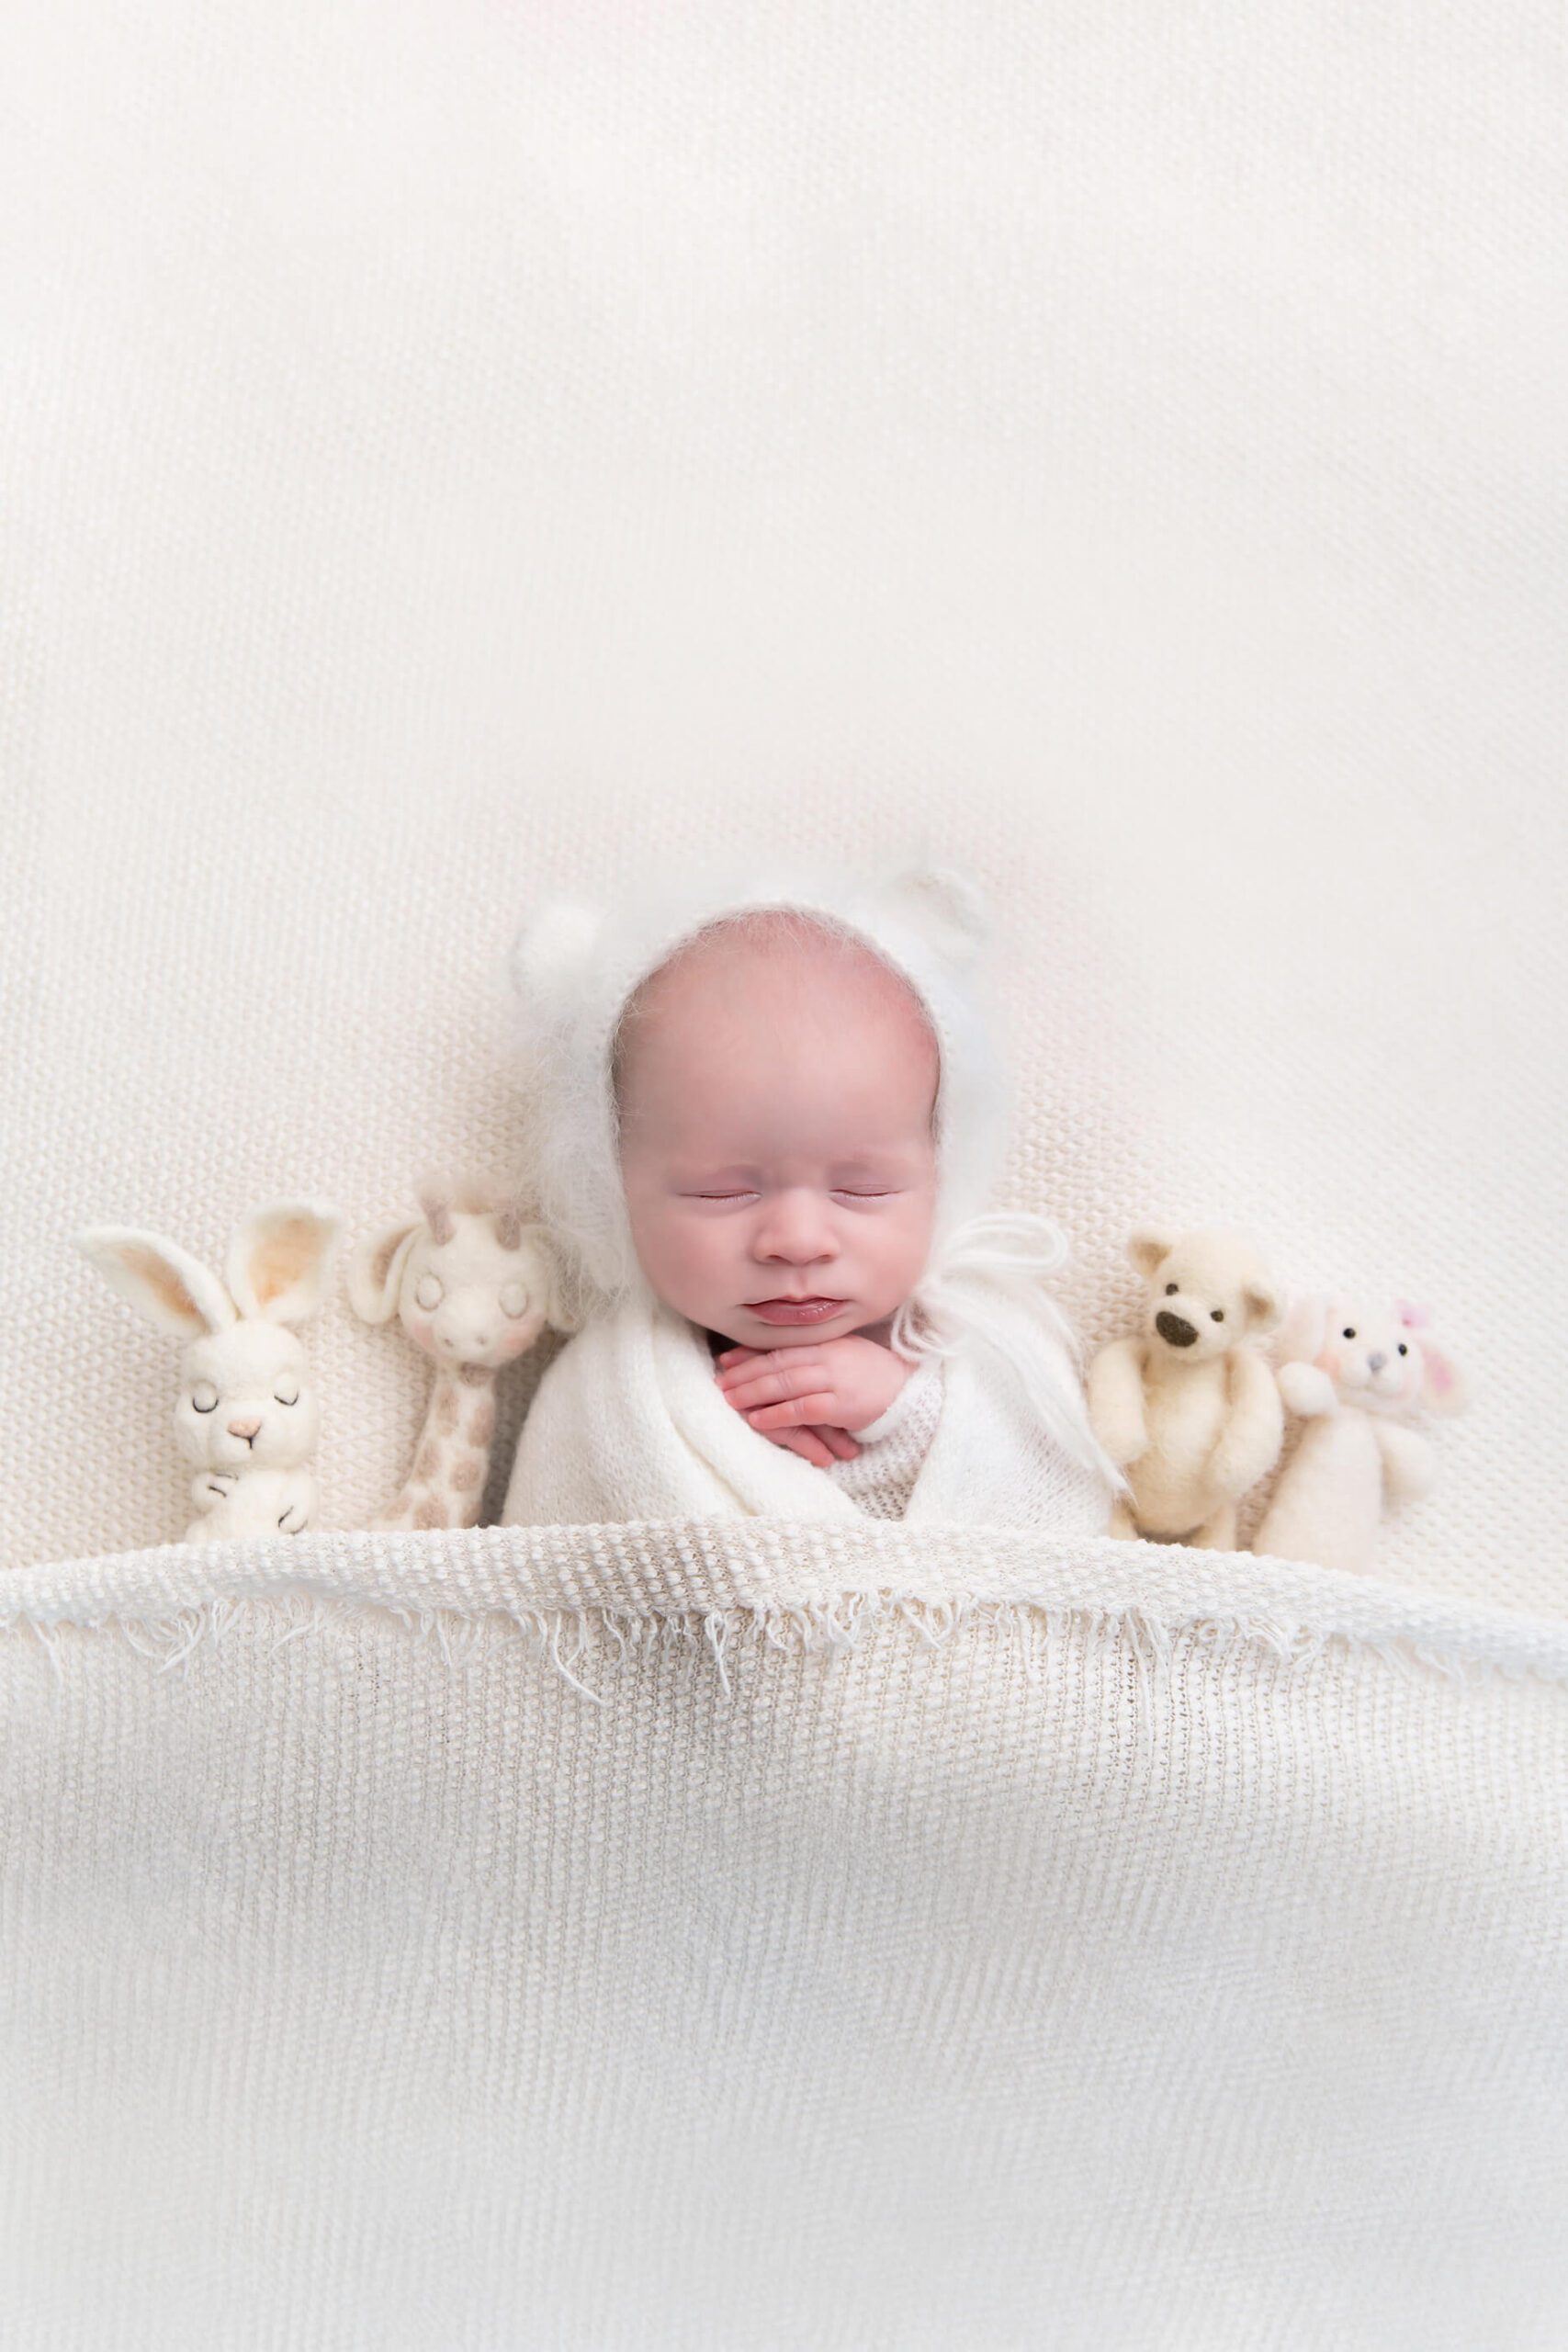 newborn baby with tiny props